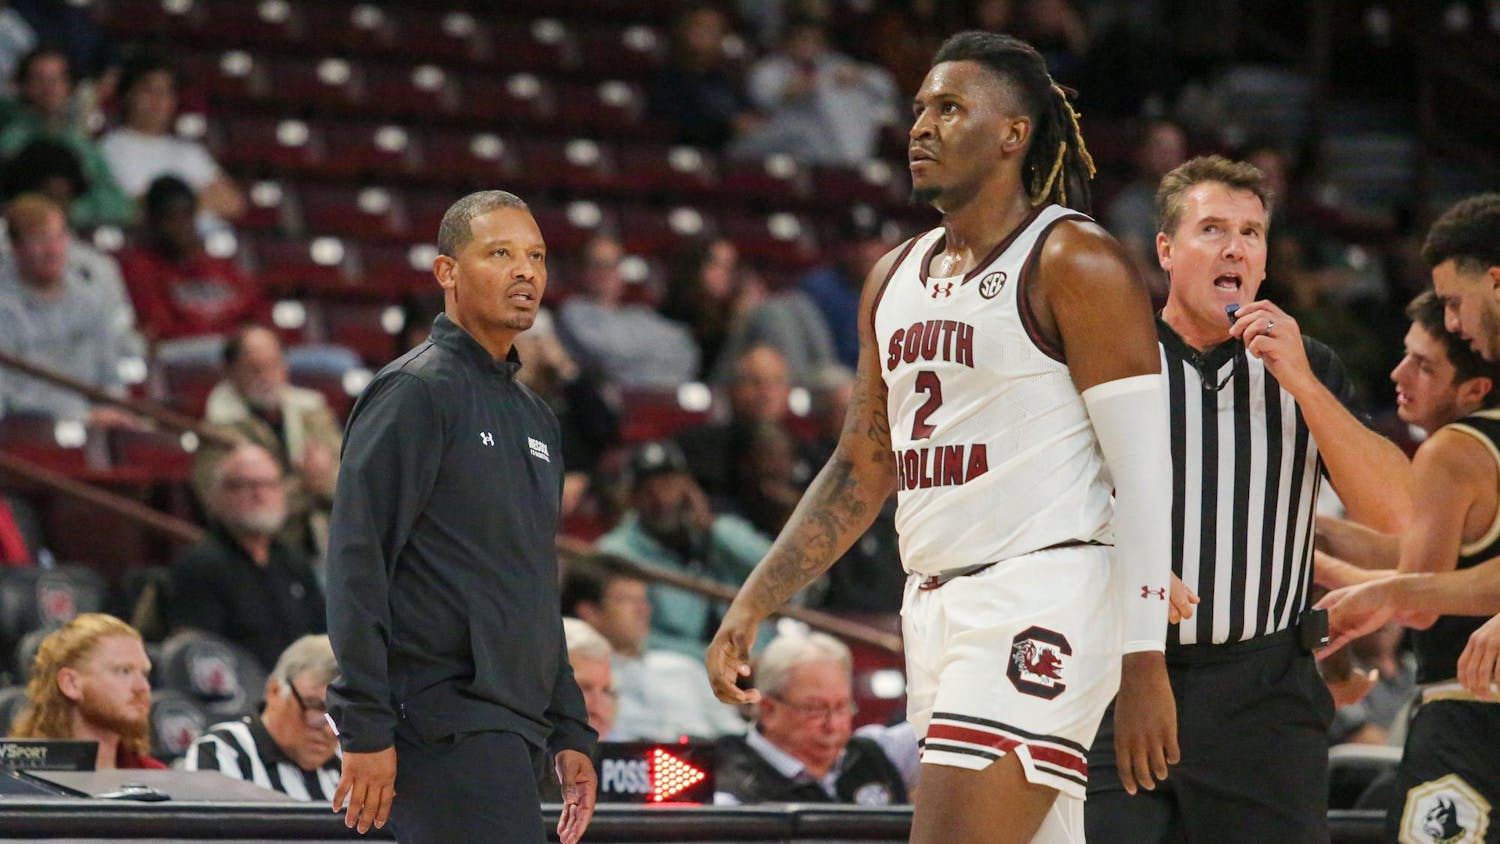 FILE - Head coach Lamont Paris watches graduate student forward B.J. Mack during South Carolina’s exhibition game against Wofford at Colonial Life Arena on Nov. 1, 2023. The Gamecocks fell to the Auburn Tigers 86-55 in the quarterfinals of the SEC Tournament on March 15, 2024, where Mack led the team in scoring with 14 points.